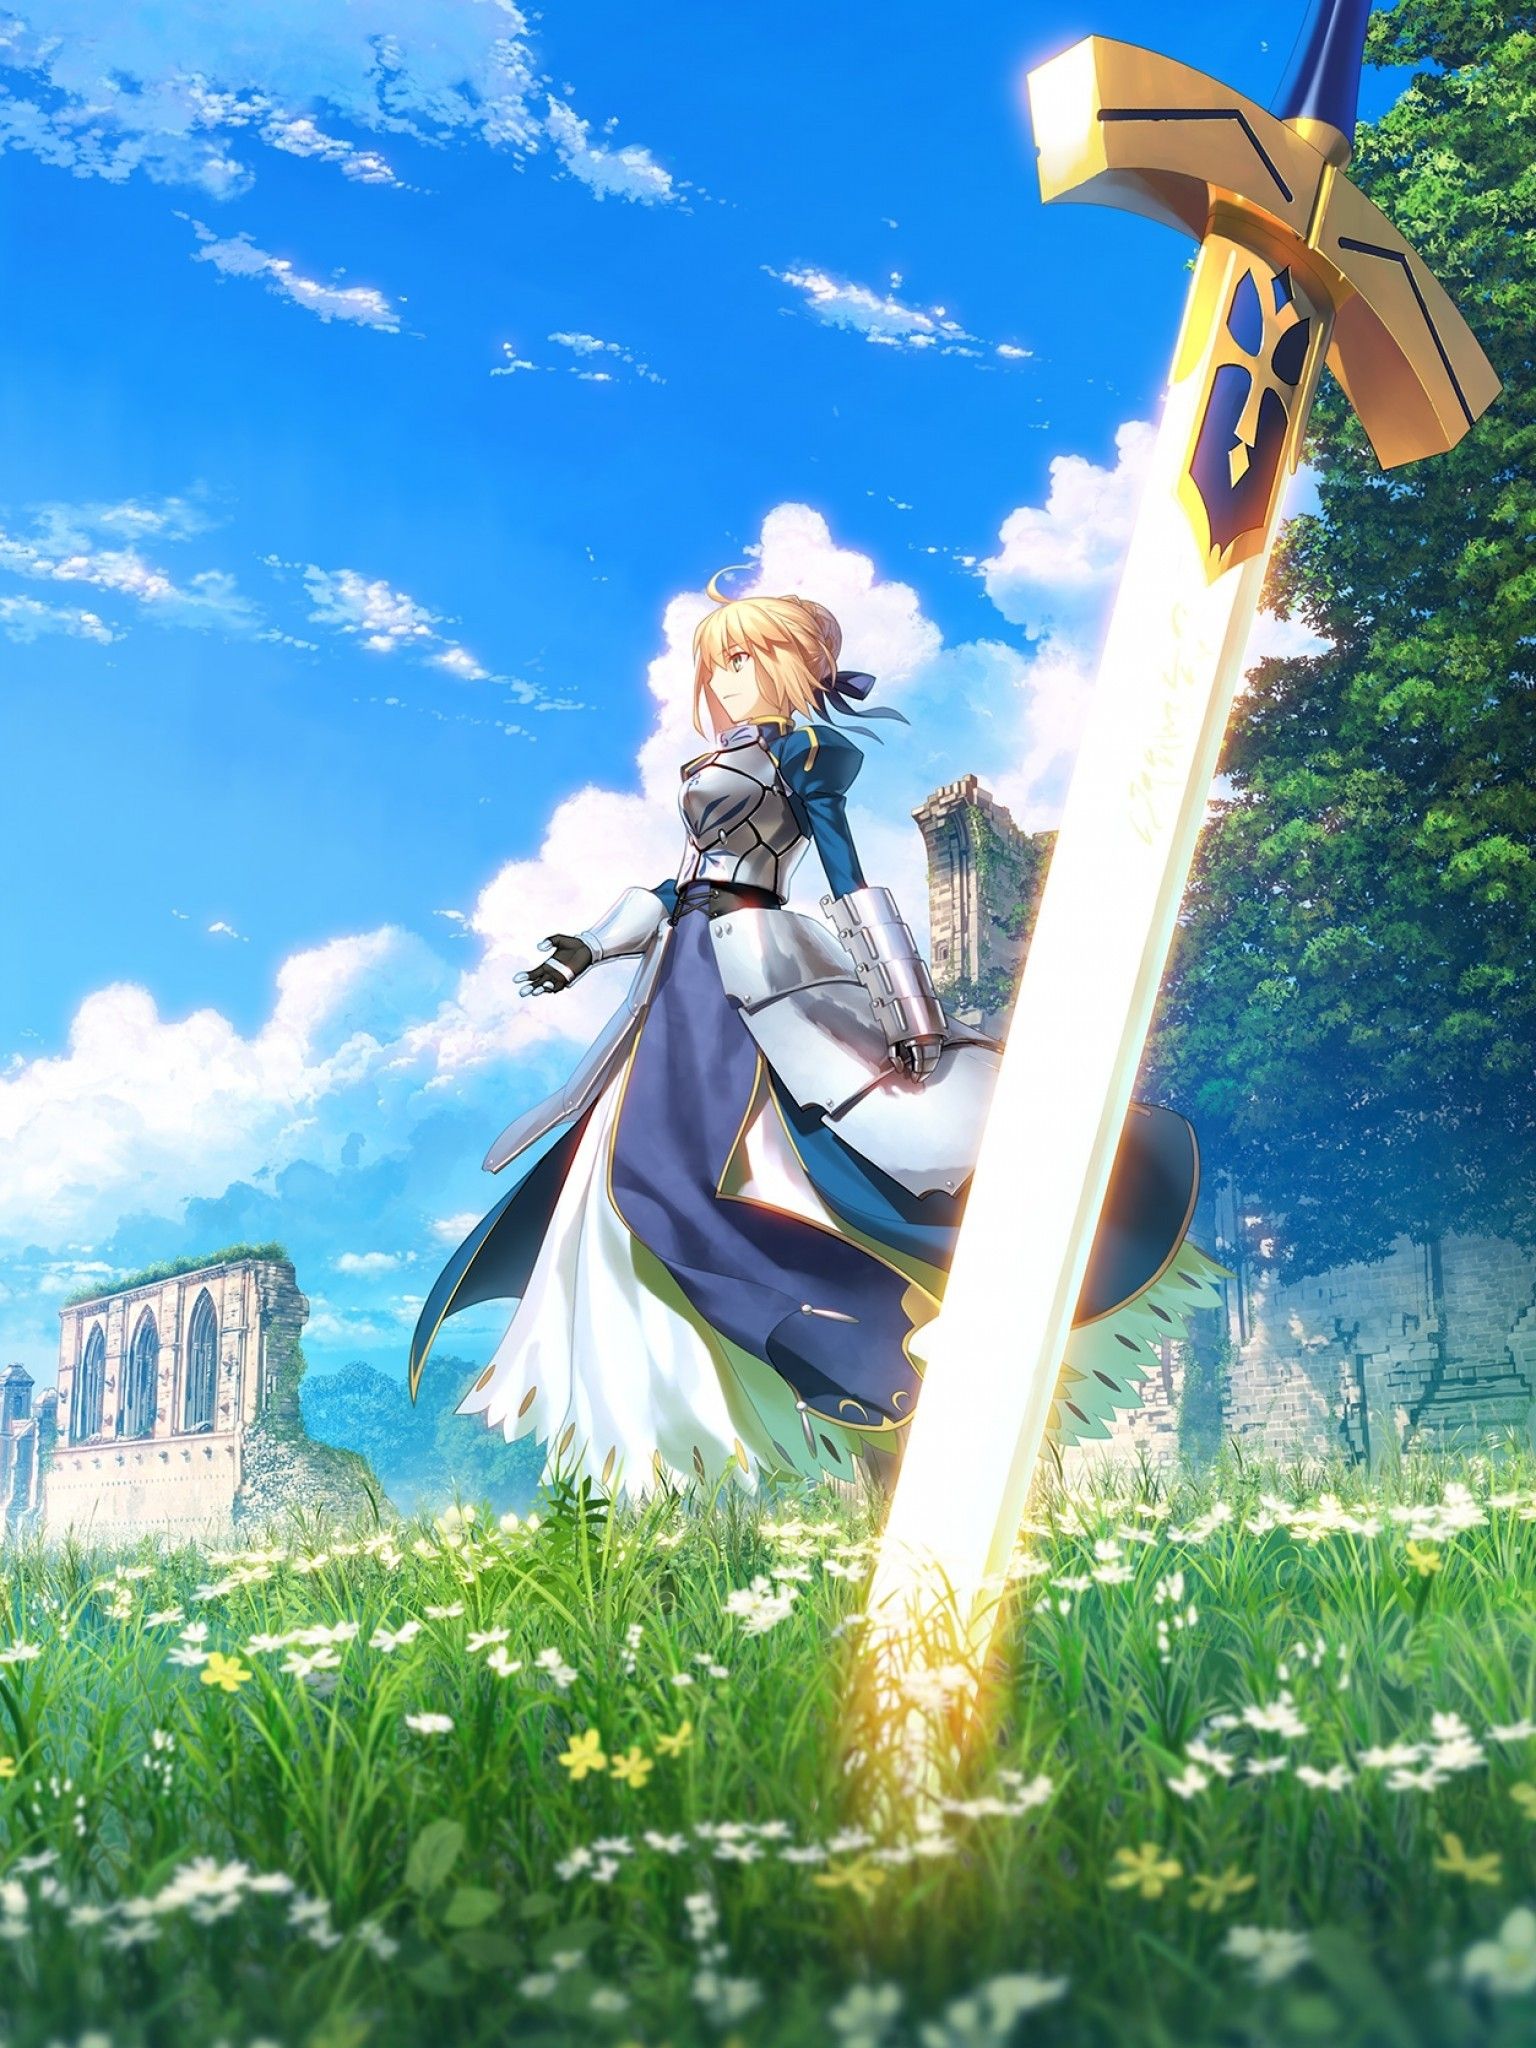 Download 1536x2048 Saber, Fate Stay Night, Sword, Grass, Flowers, Clouds, Blonde, Armor Wallpaper for Apple iPad Mini, Apple IPad 4